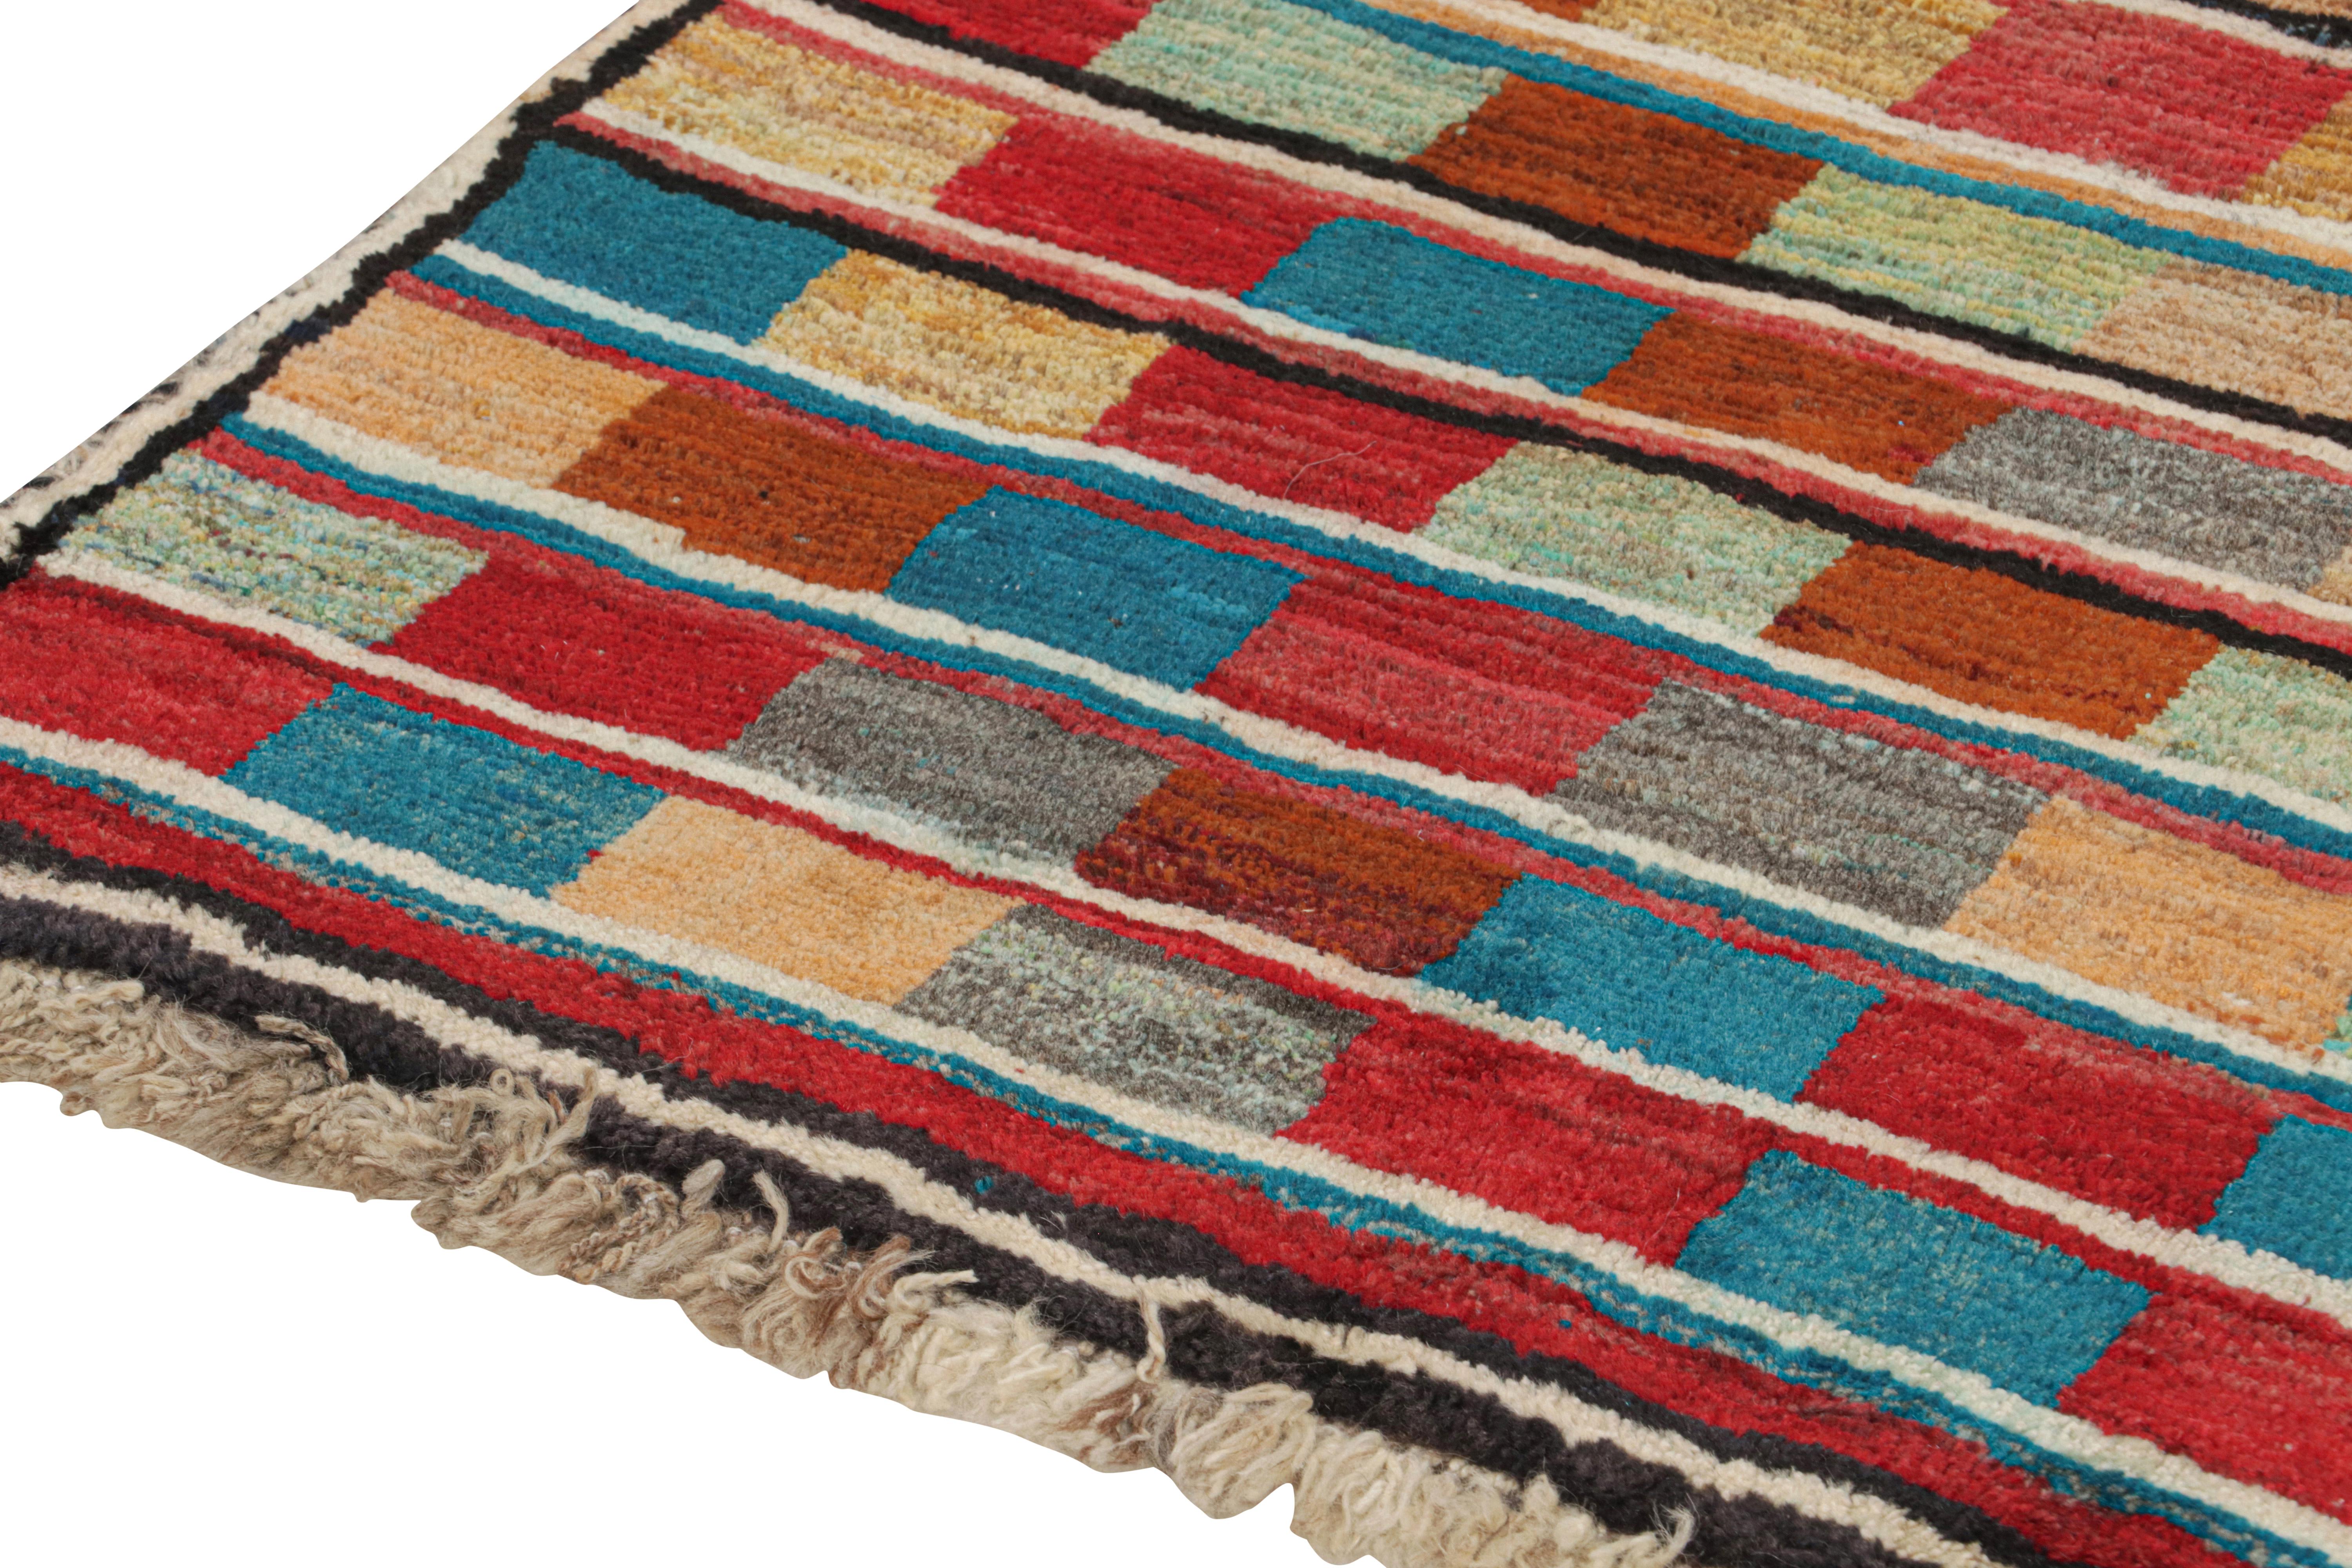 Vintage Qashqai Persian Gabbeh runner in Polychromatic Patterns by Rug & Kilim In Good Condition For Sale In Long Island City, NY